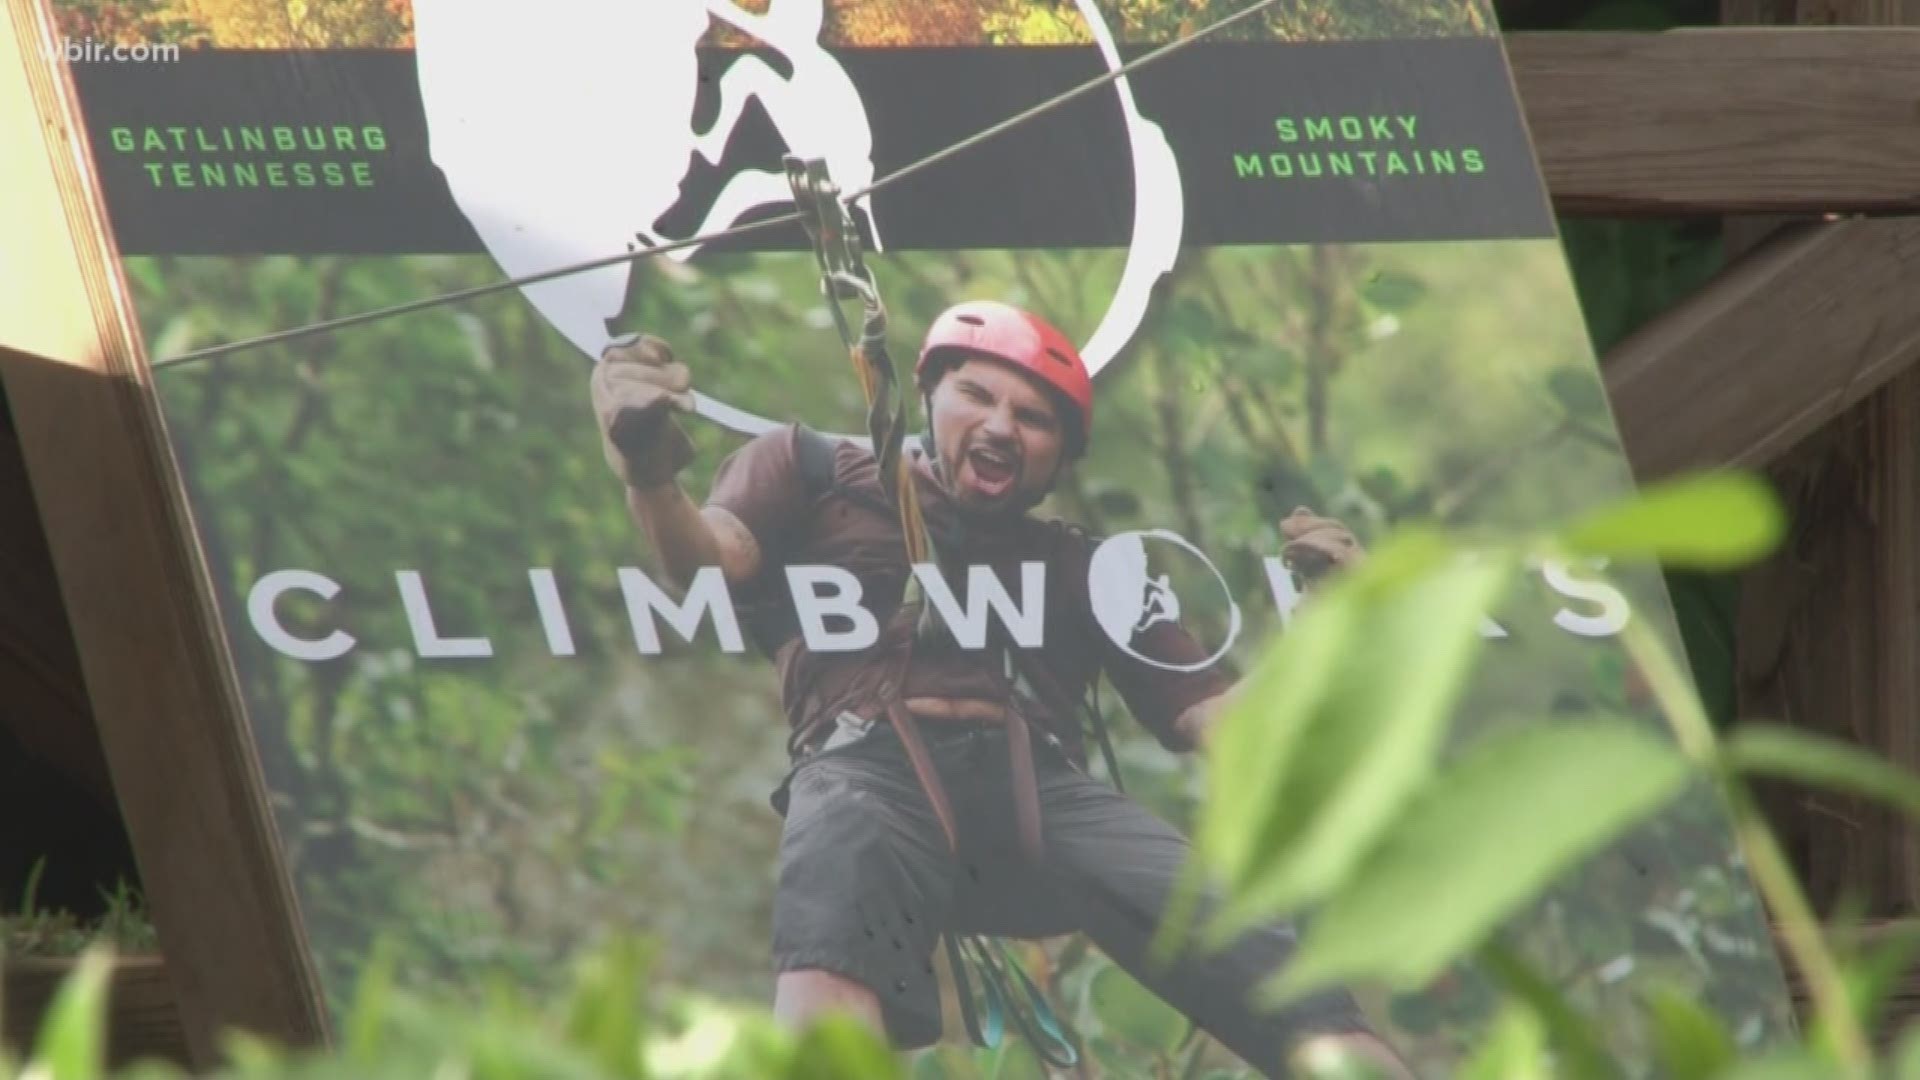 More than 100 people are still sick or have just gotten sick after visiting CLIMB Works Zipline Canopy Tour in Gatlinburg.